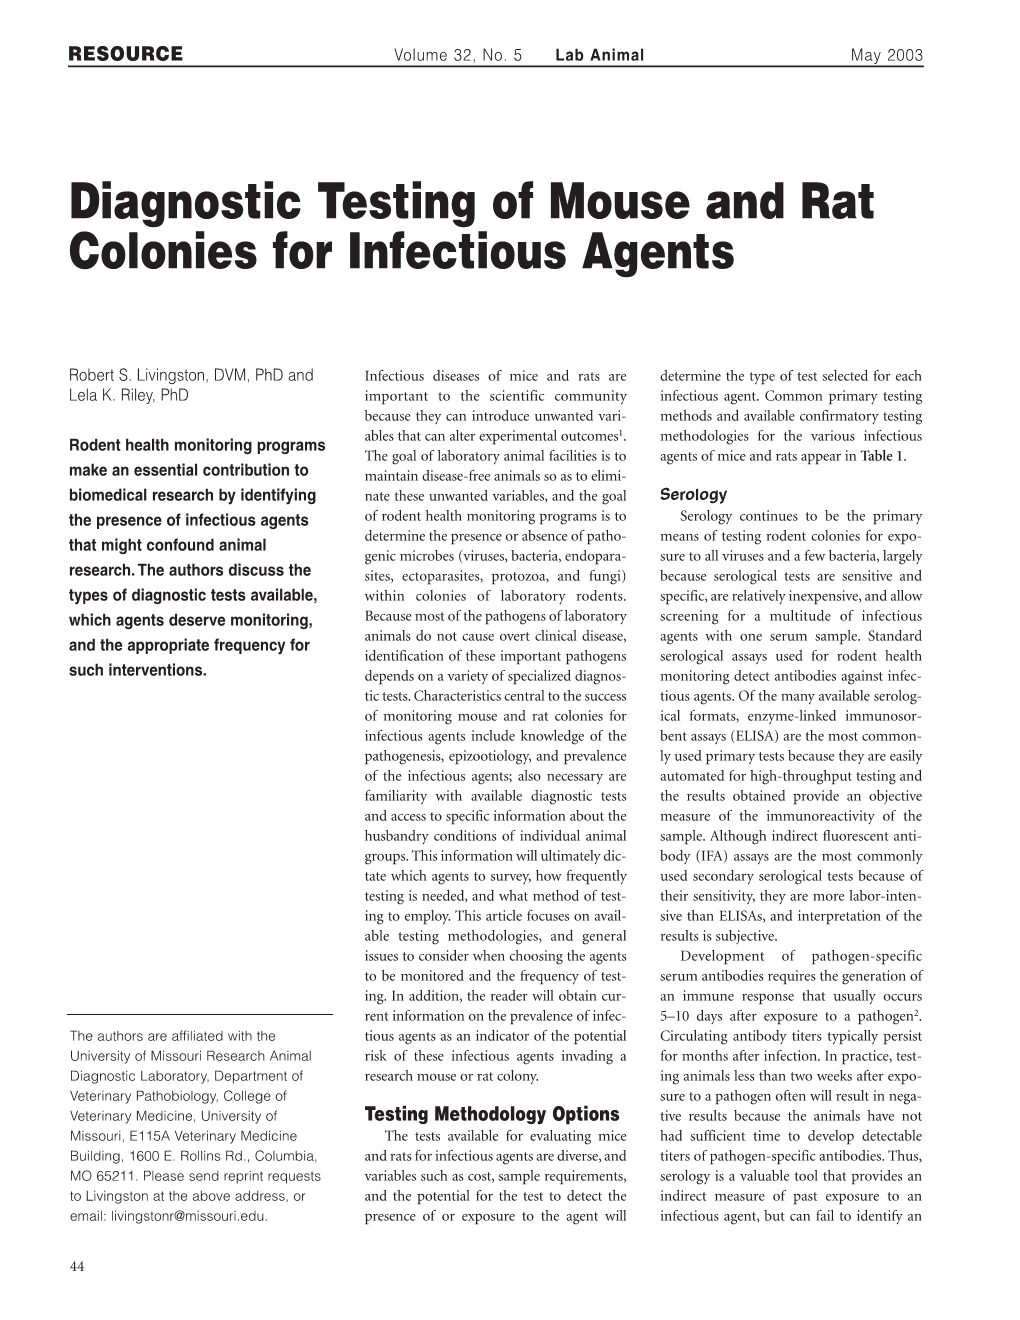 Diagnostic Testing of Mouse and Rat Colonies for Infectious Agents